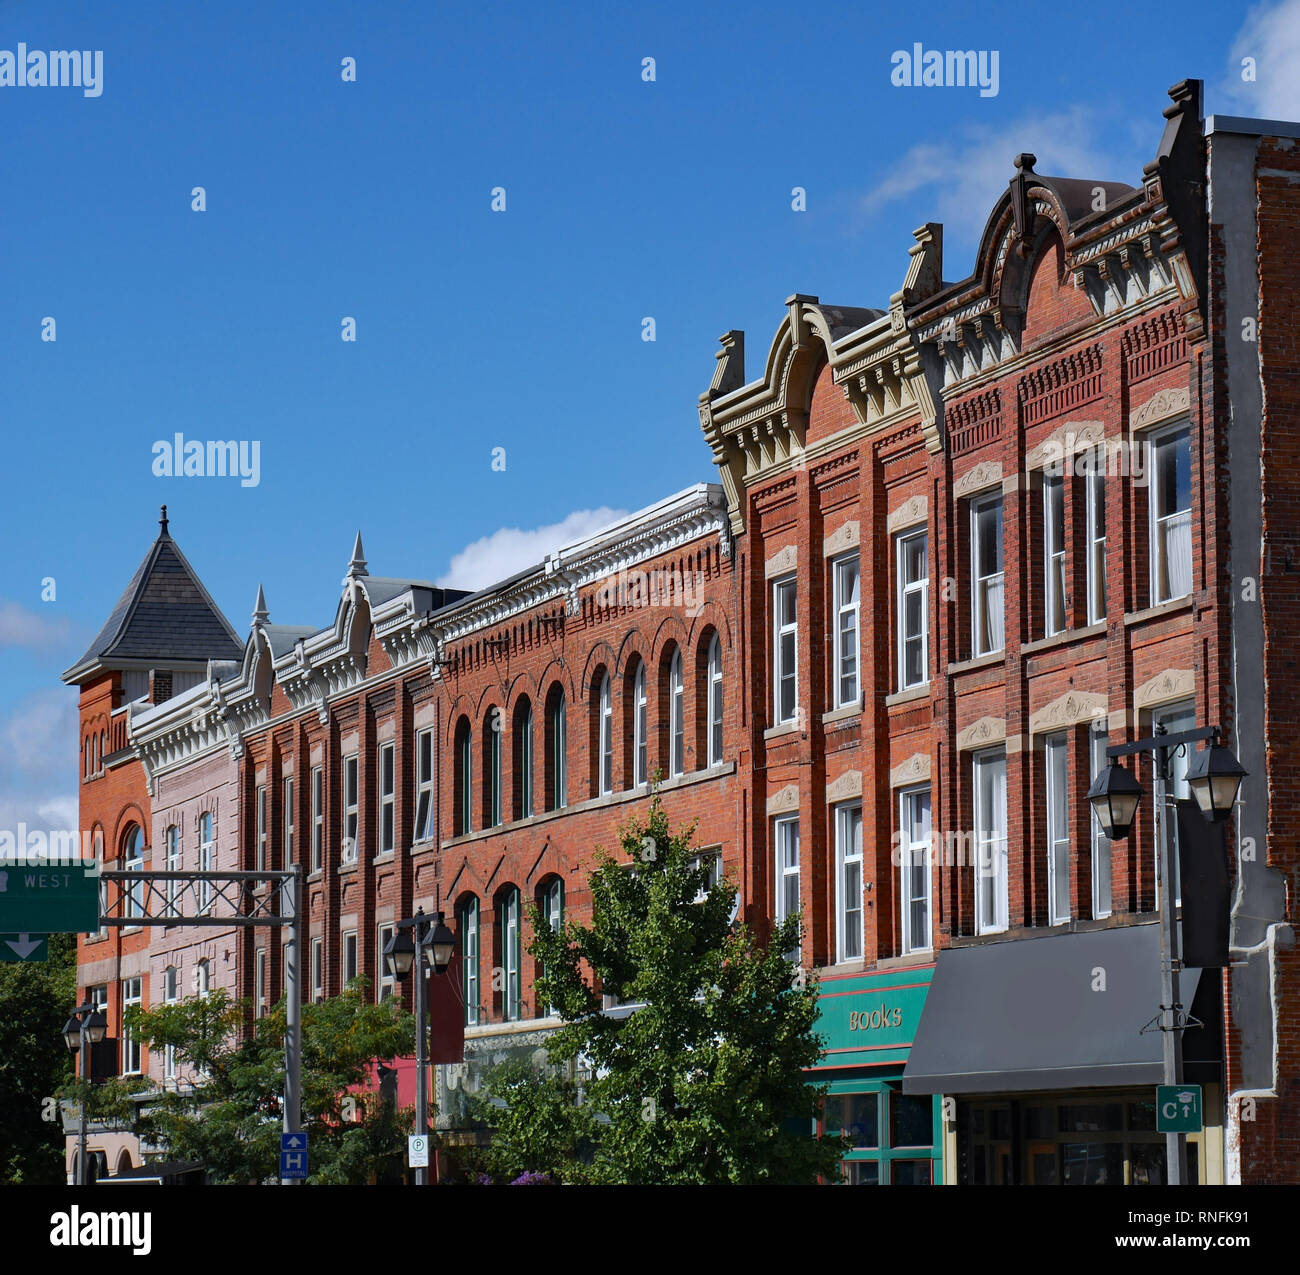 Facades of preserved 19th century commercial buildings of the type found in some older North American small town main streets Stock Photo